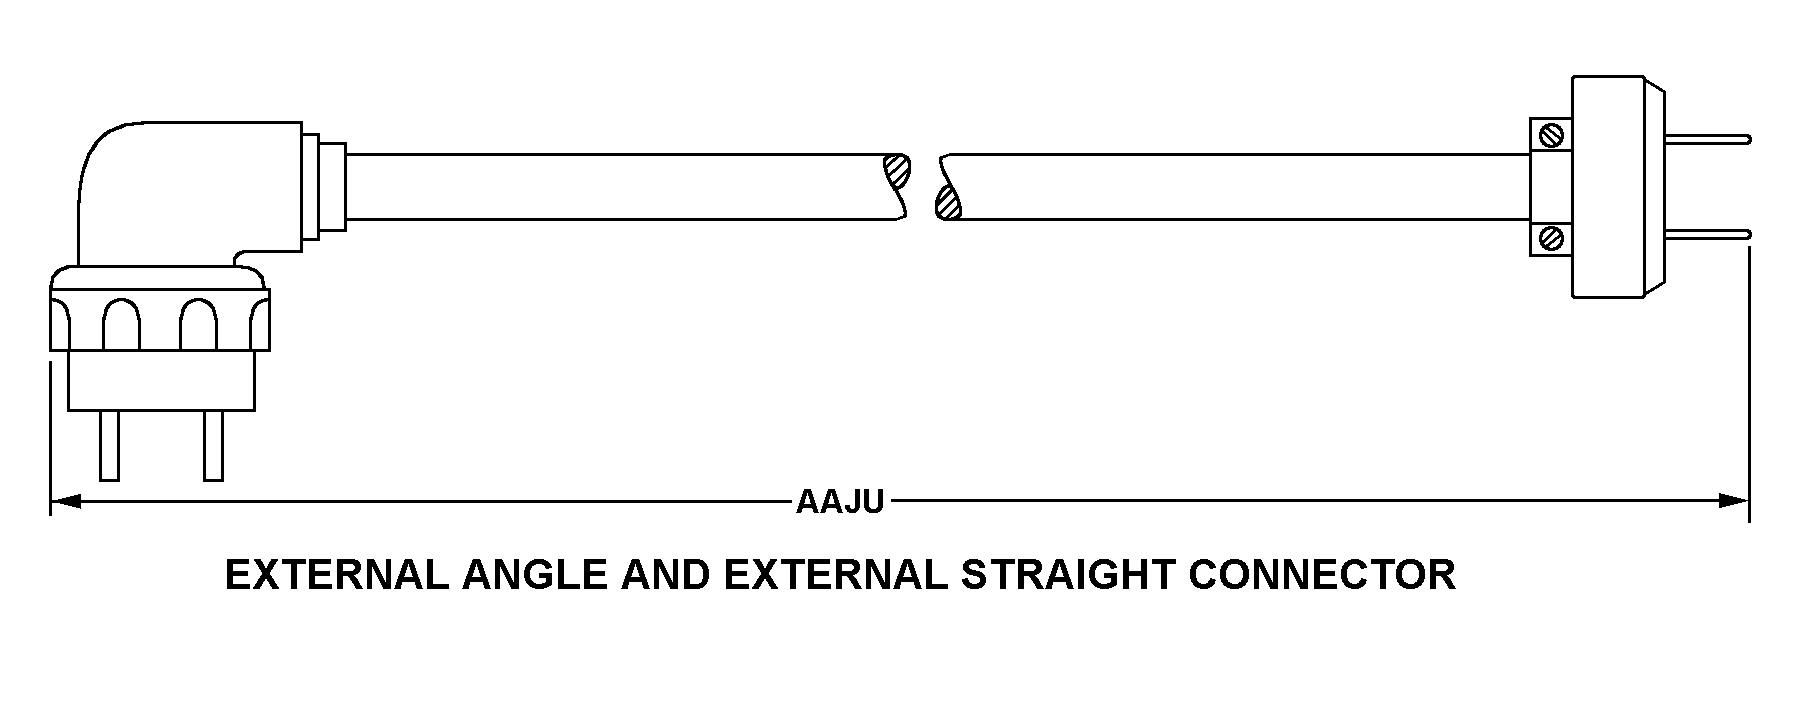 EXTERNAL ANGLE AND EXTERNAL STRAIGHT CONNECTOR style nsn 6150-01-371-0277